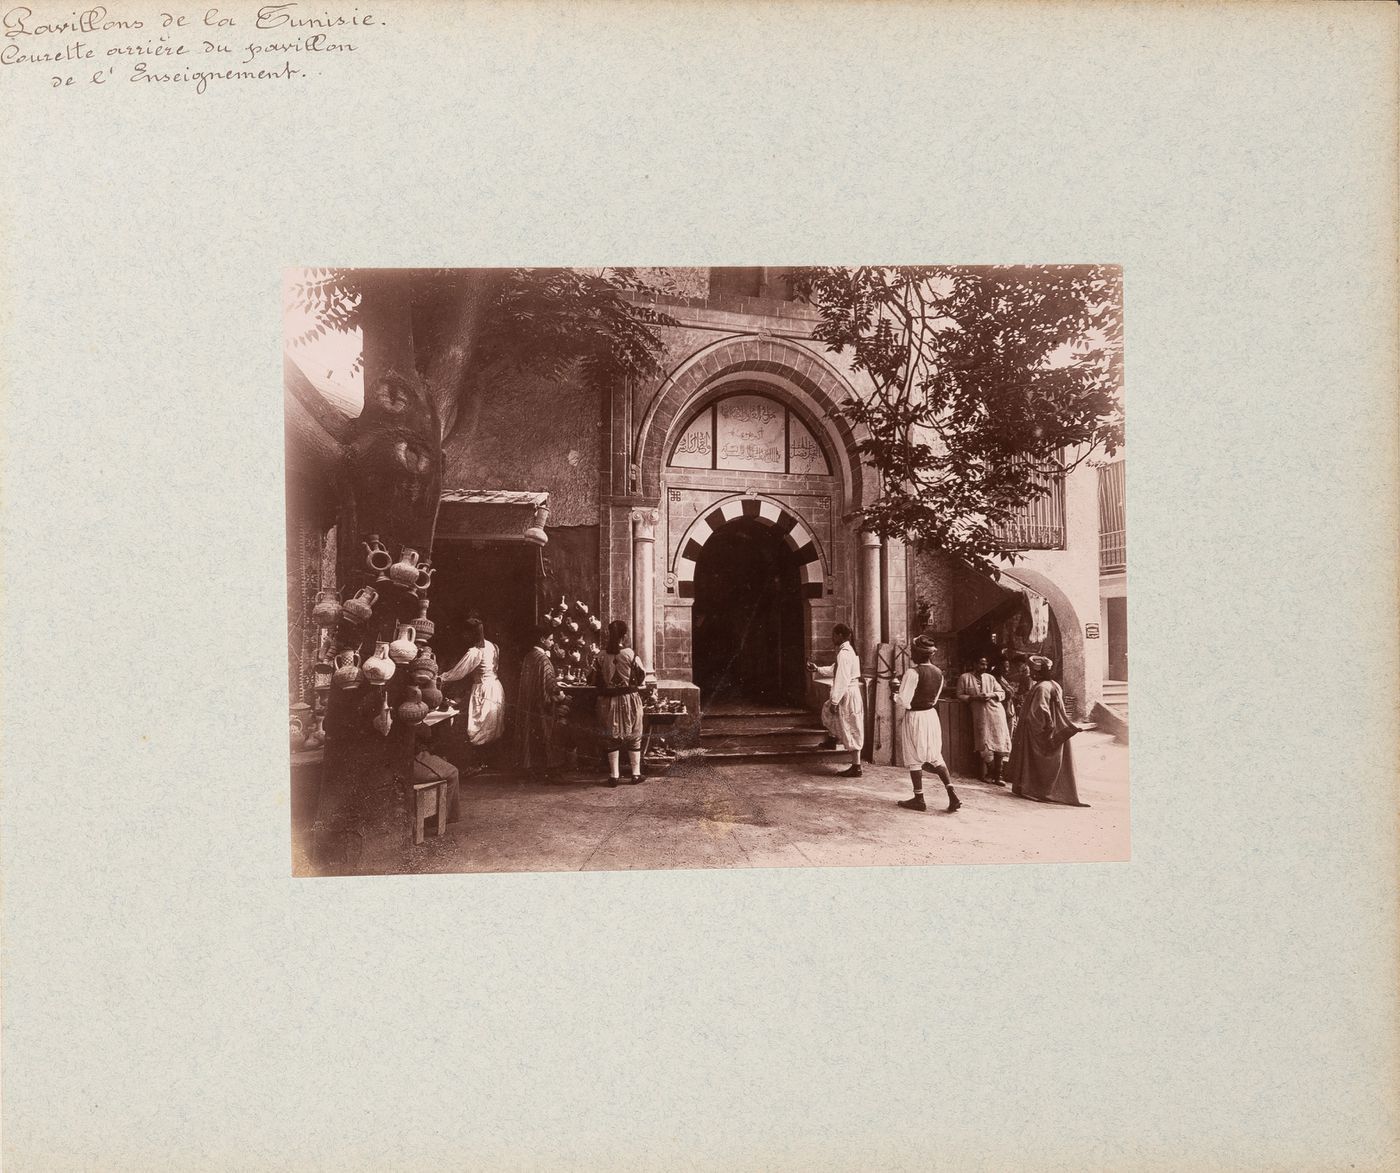 View of people near back entrance to pavilion of the Direction de l'enseignement, Tunisian section, Exposition universelle, 1900, Paris France